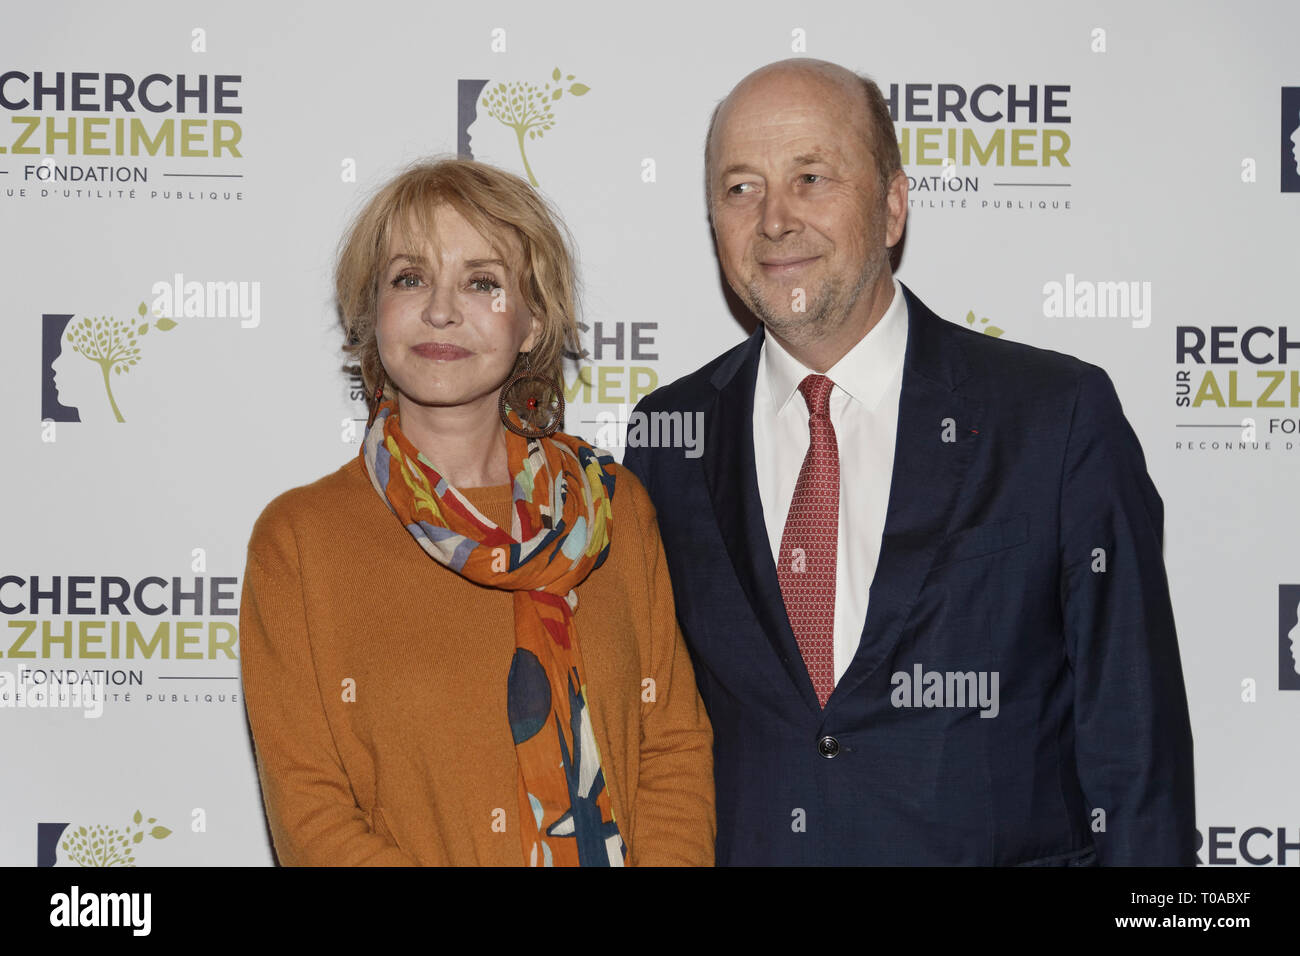 Paris, France. 18th Mar 2019. Fanny Cottençon and Olivier De Ladoucette - Photocall of the 14th Gala 2019 of the Association for Alzheimer Research at the Olympia in Paris on March 18, 2019 Credit: Véronique PHITOUSSI/Alamy Live News Stock Photo